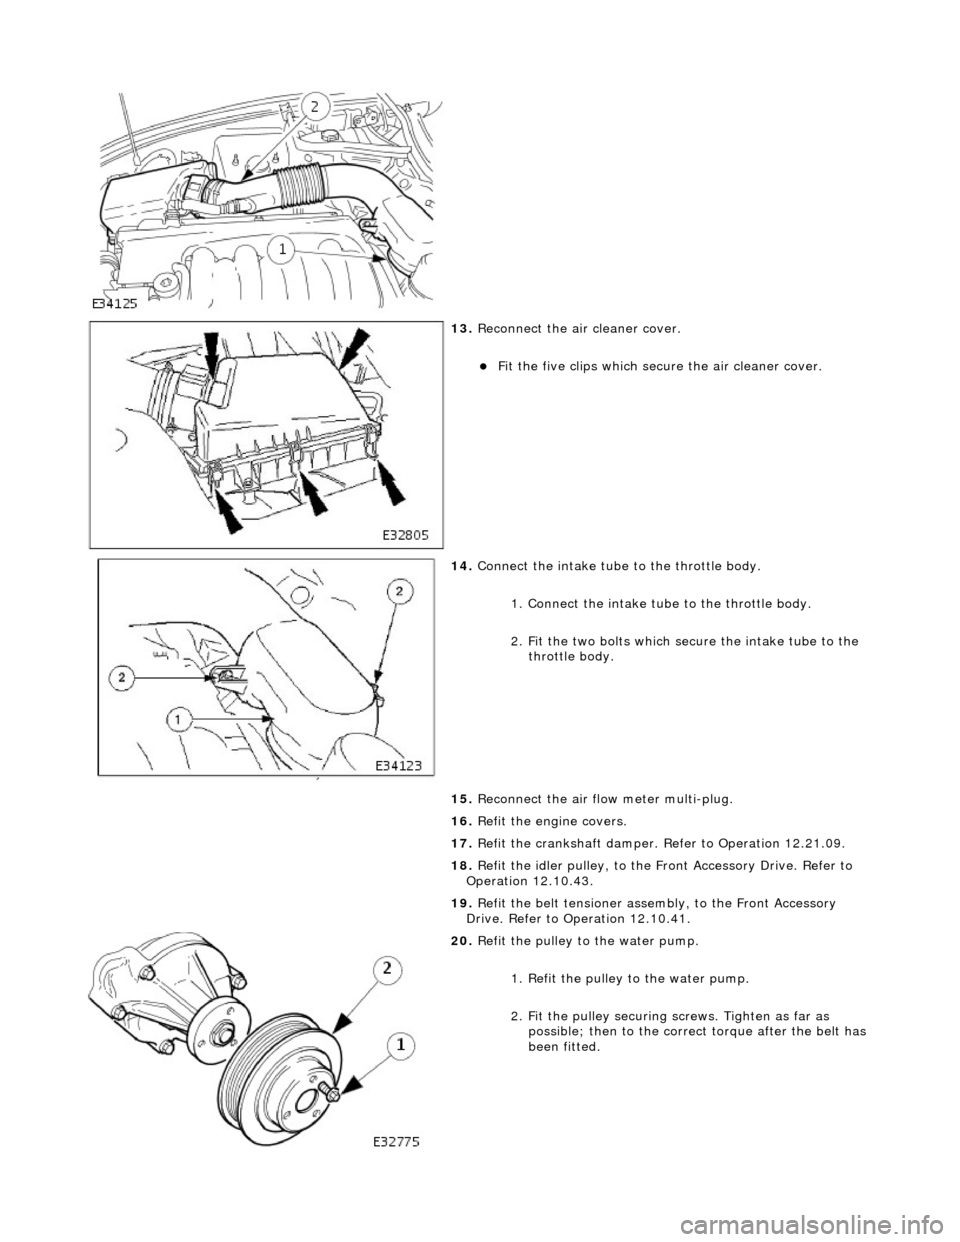 JAGUAR X308 1998 2.G User Guide  
 
13. Reconnect the air cleaner cover. 
Fit the five clips which secu re the air cleaner cover.  
 
14. Connect the intake tube to the throttle body. 
1. Connect the intake tube to the throttle b